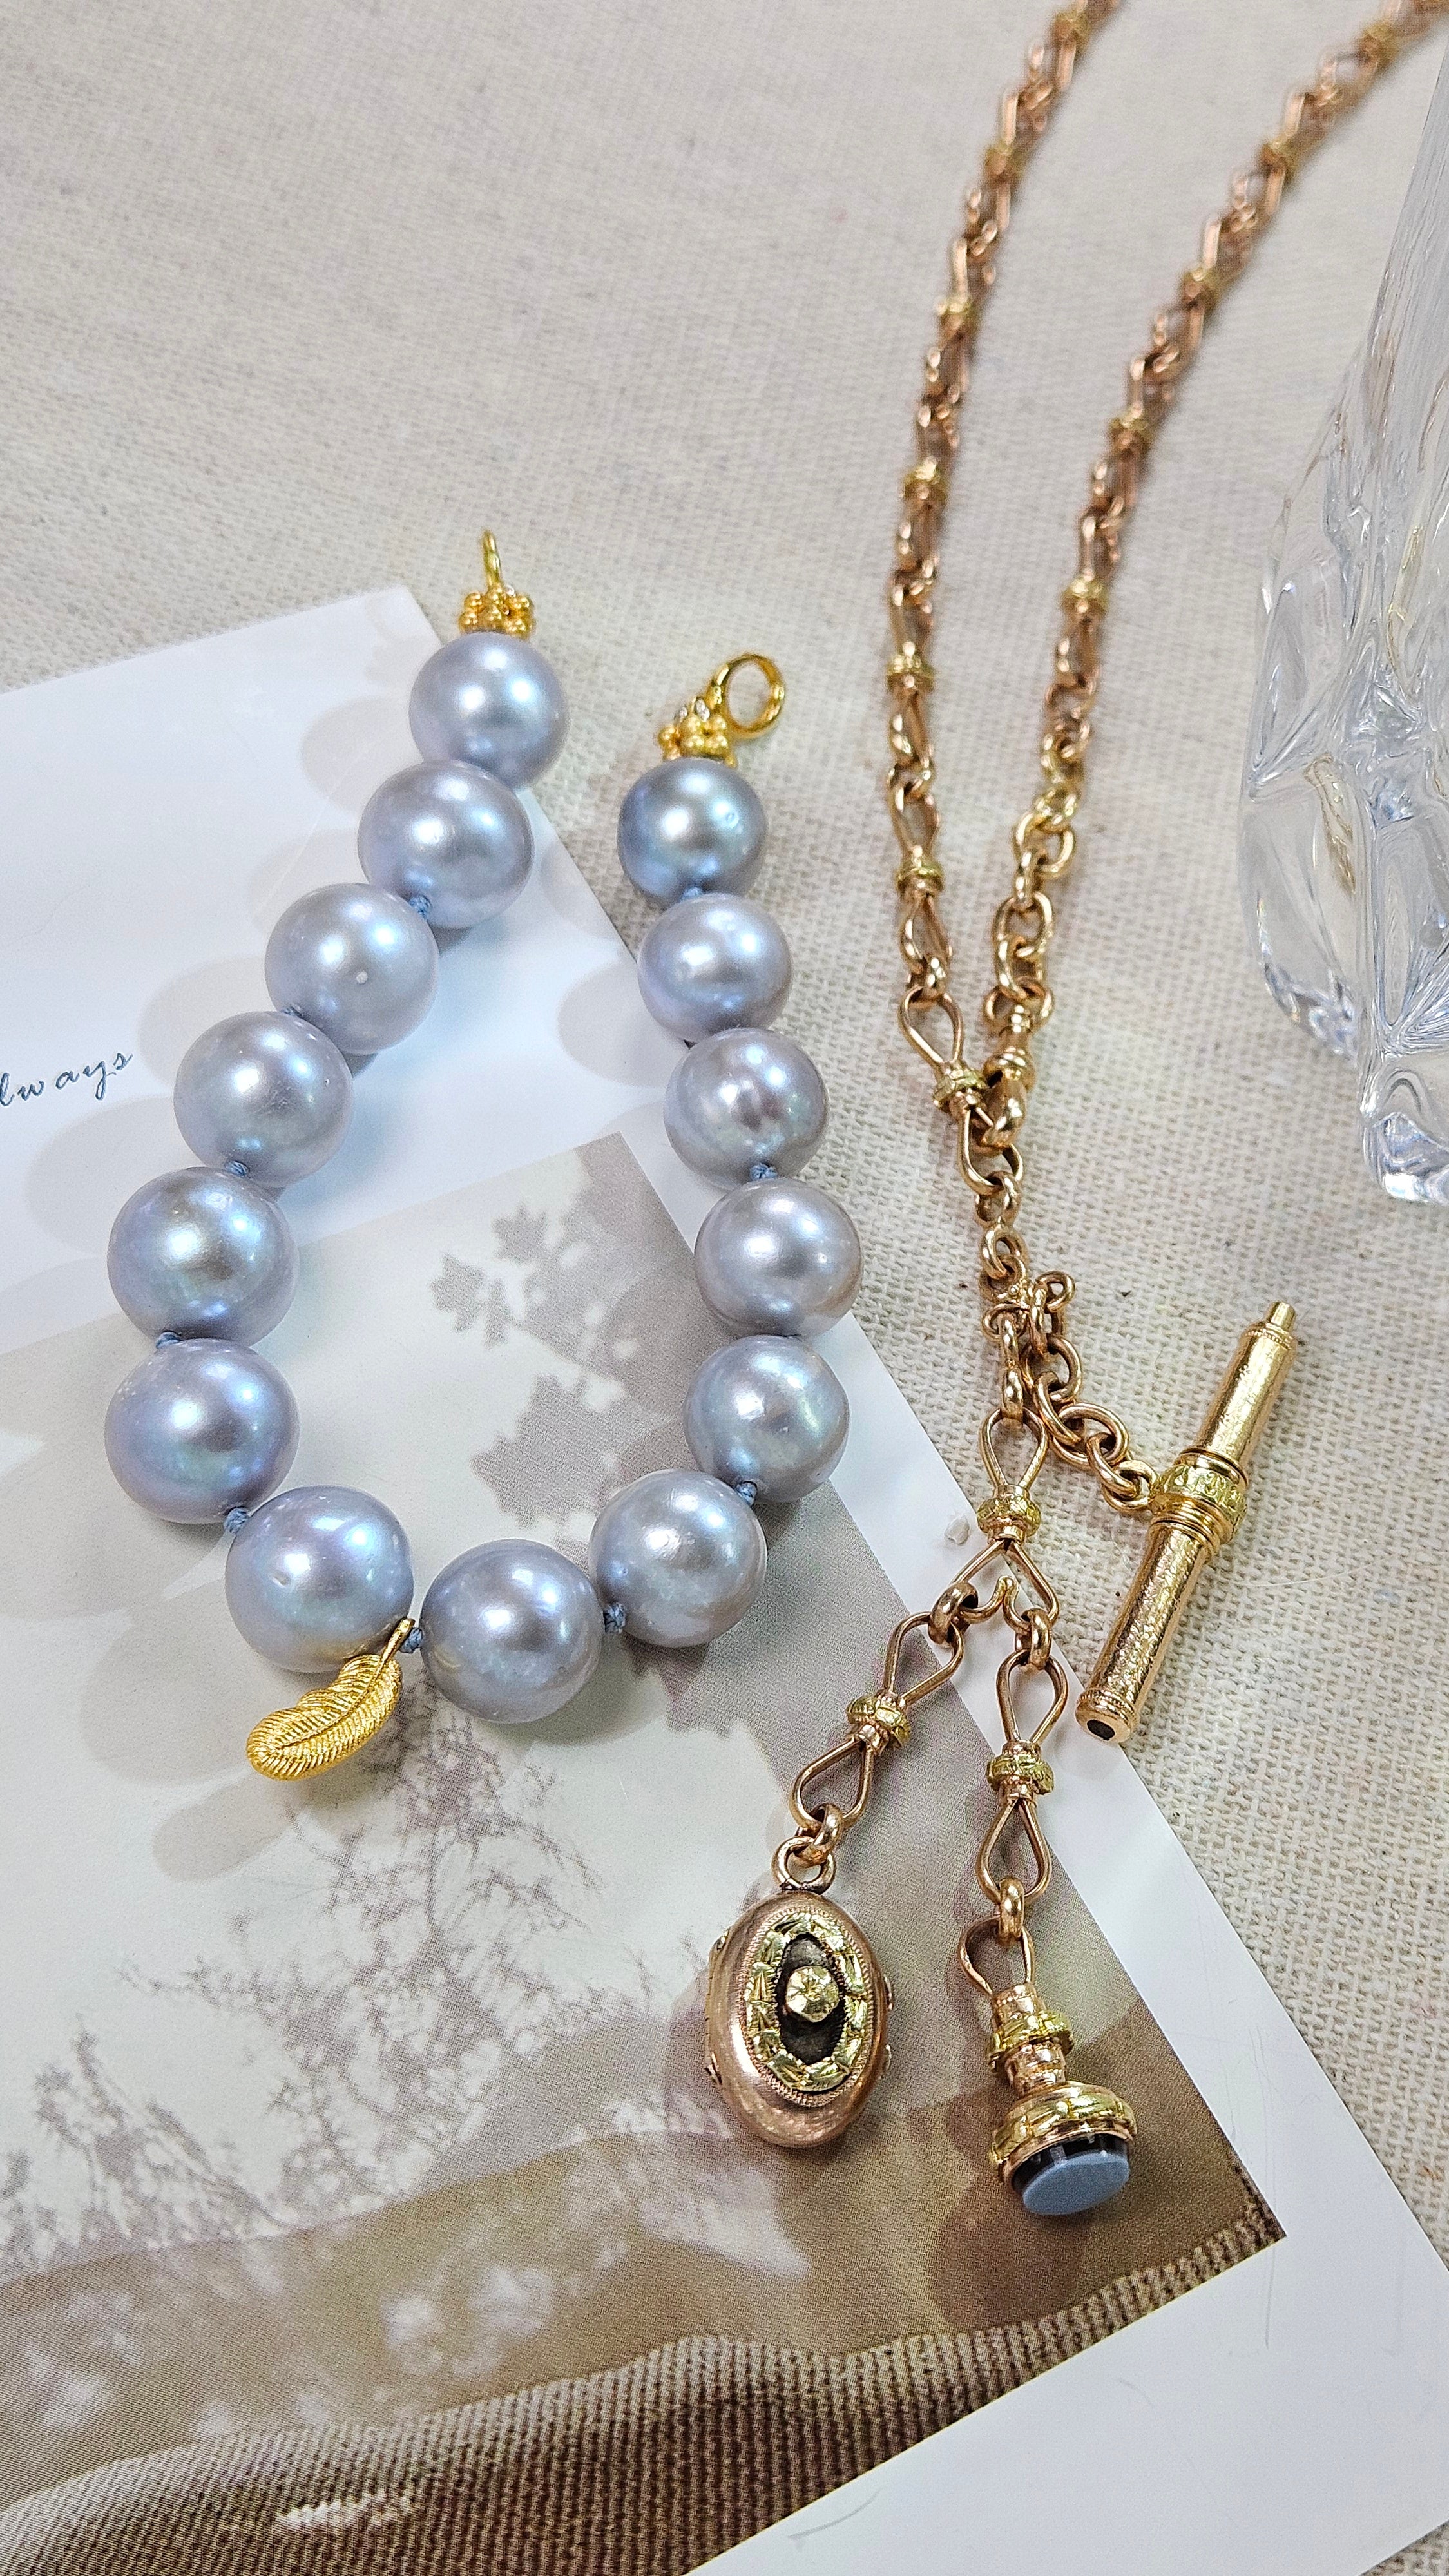 2IN1 - Antique 18K Yellow Rose Gold Two Tone Watch Chain with Key, Locket and Fob, Freshwater Pearl Feather Charm Bracelet Combo